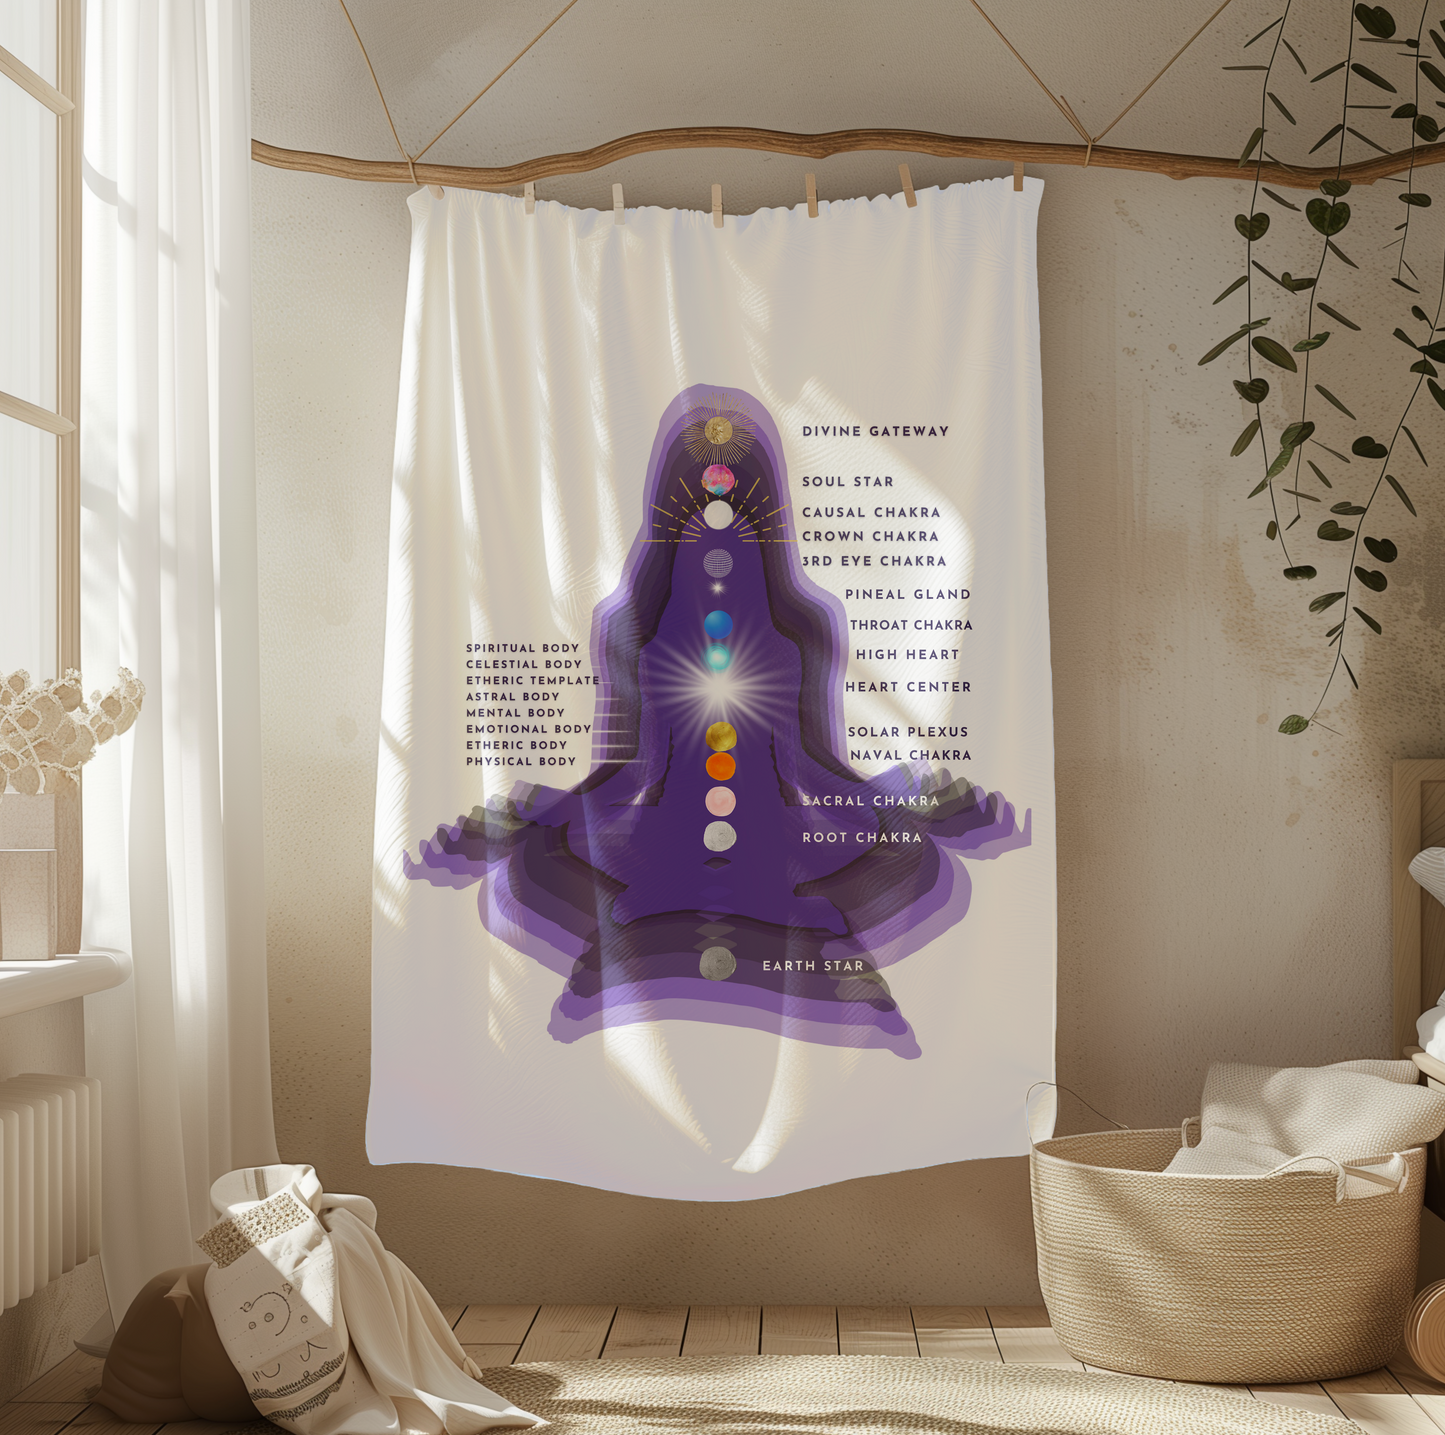 12 Chakra Bed Sheet, Proxy Distance Healing Massage Table Cloth, 5D Fifth Dimensional Chakras, Auric Fields, Energy Bodies, Expanded Chakra System